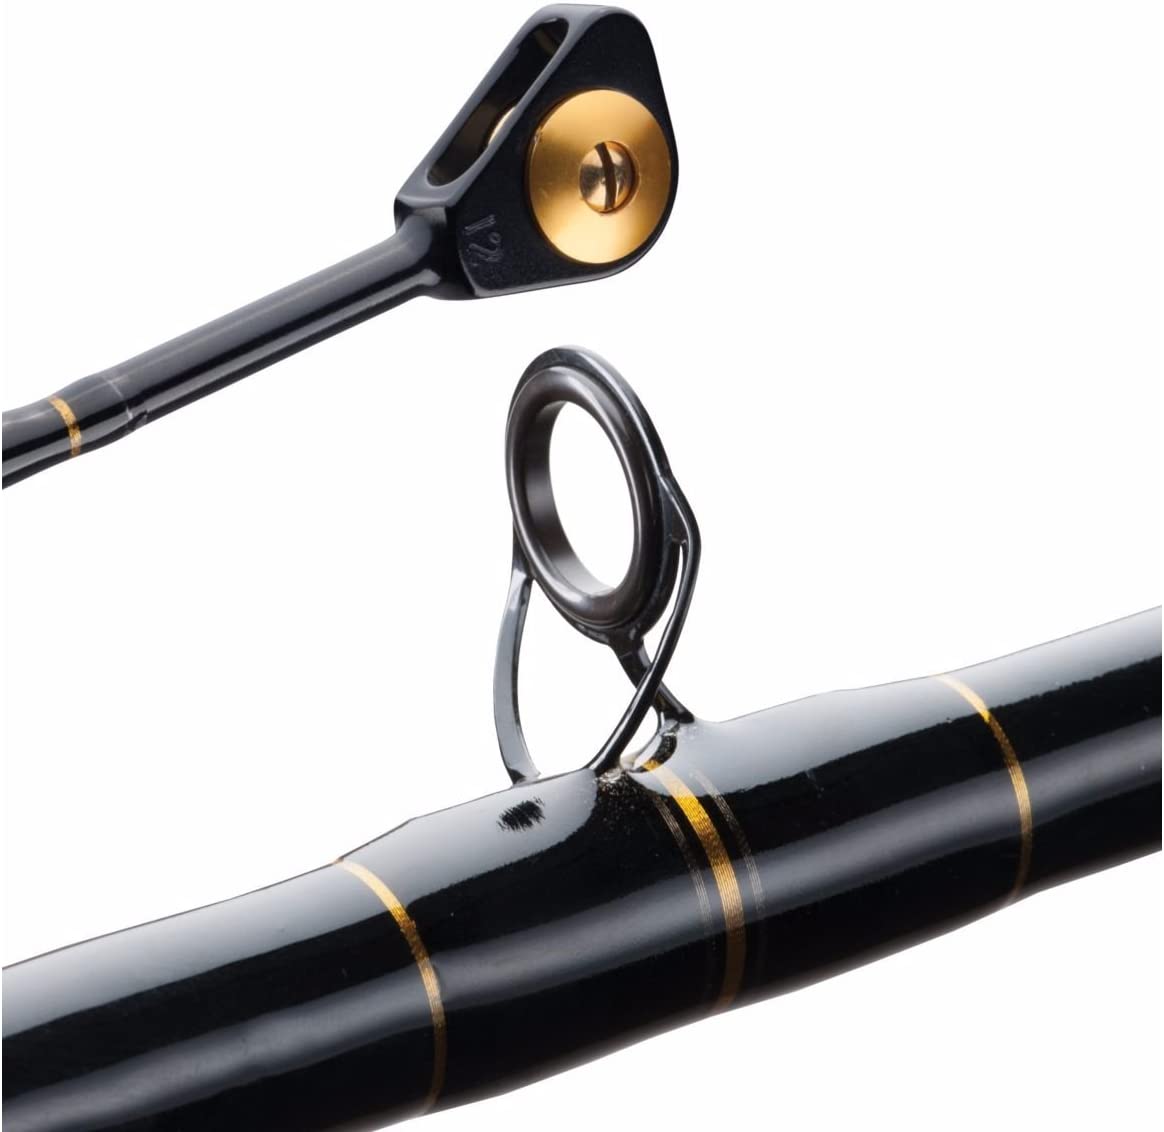 Penn Ally Conventional Boat Rods